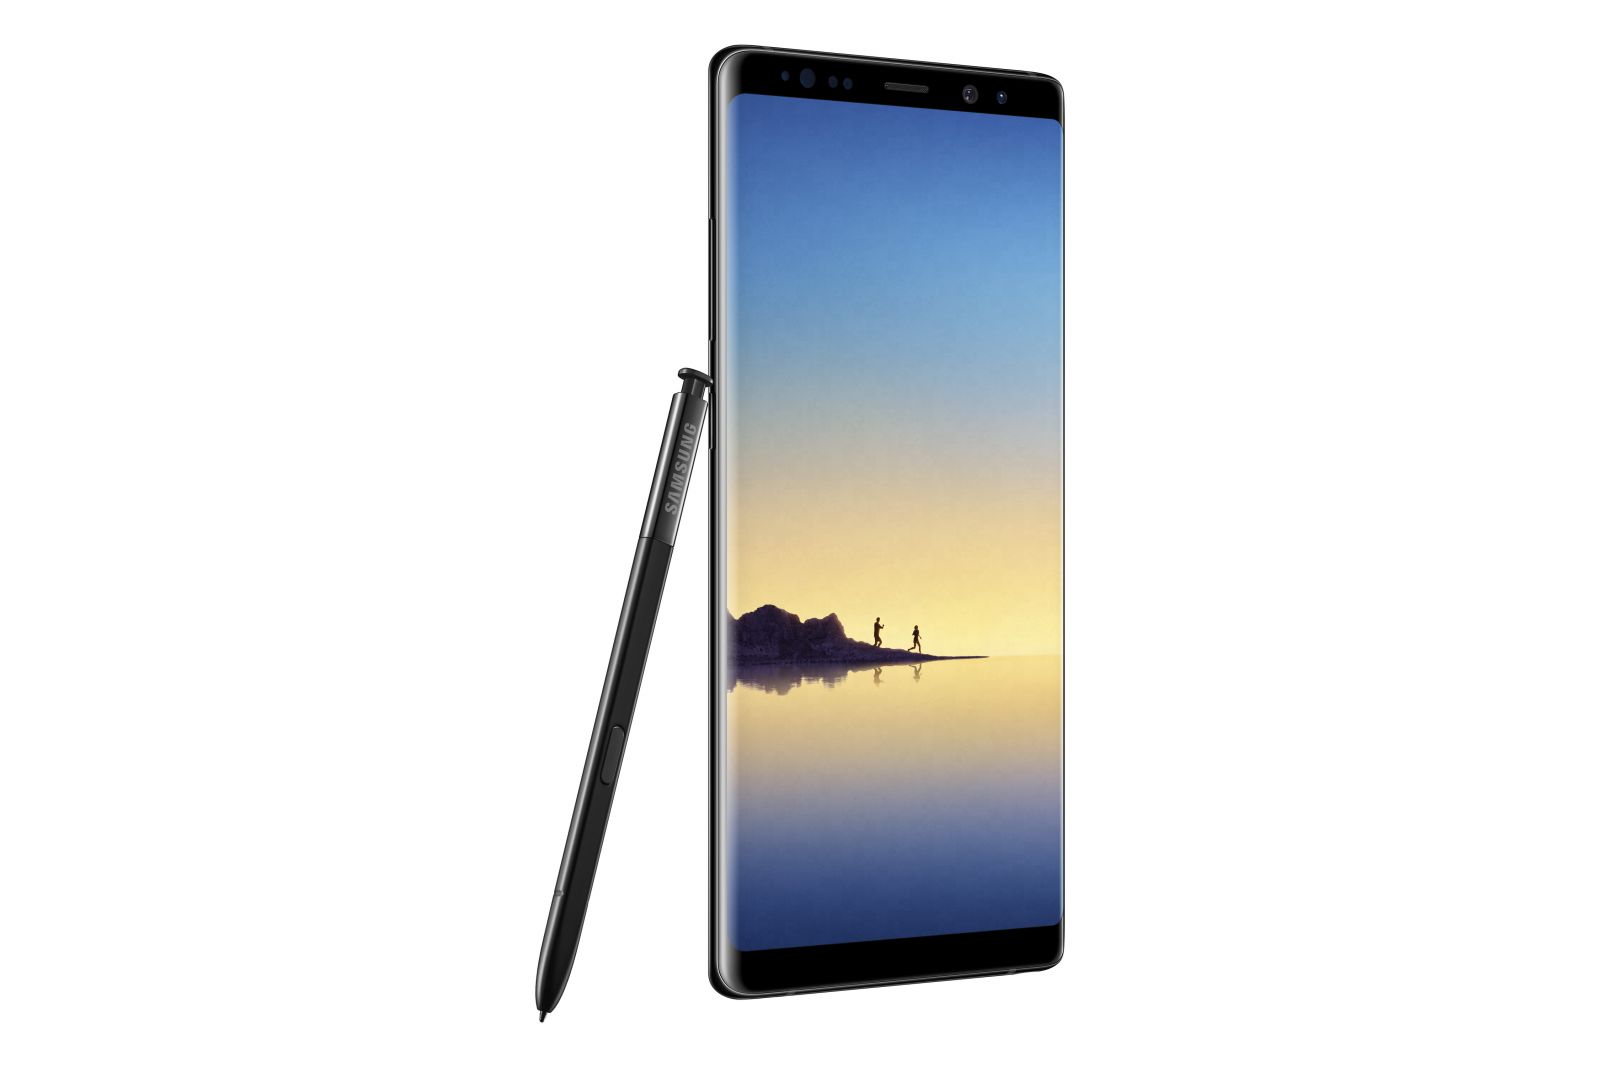 Samsung unveils price of Galaxy Note 8 in Malaysia